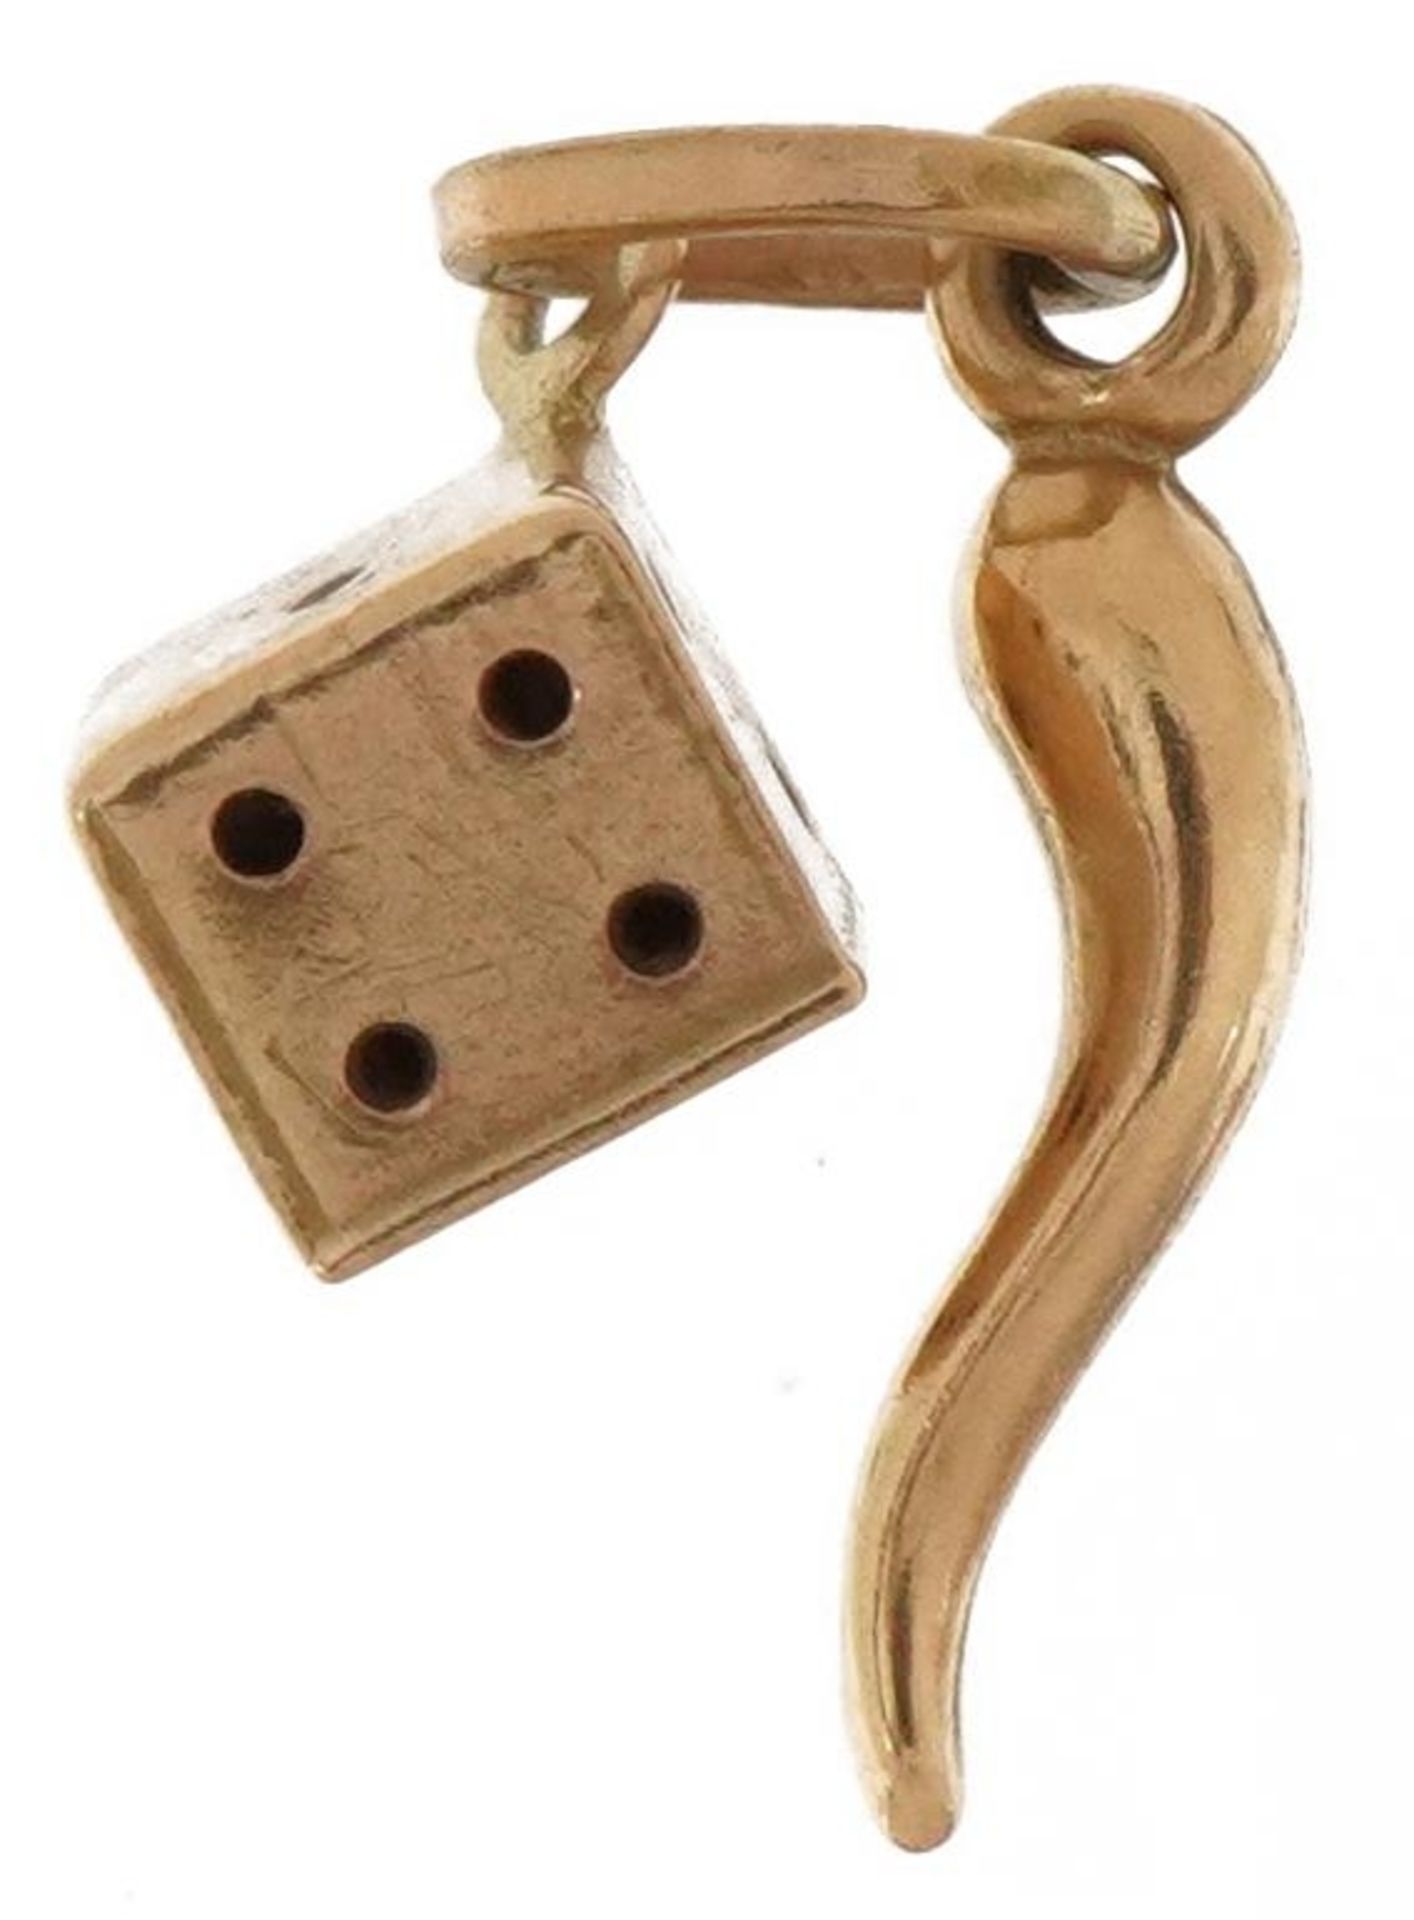 9ct gold horn of plenty and dice charm, 1.6cm high, 0.4g : For further information on this lot